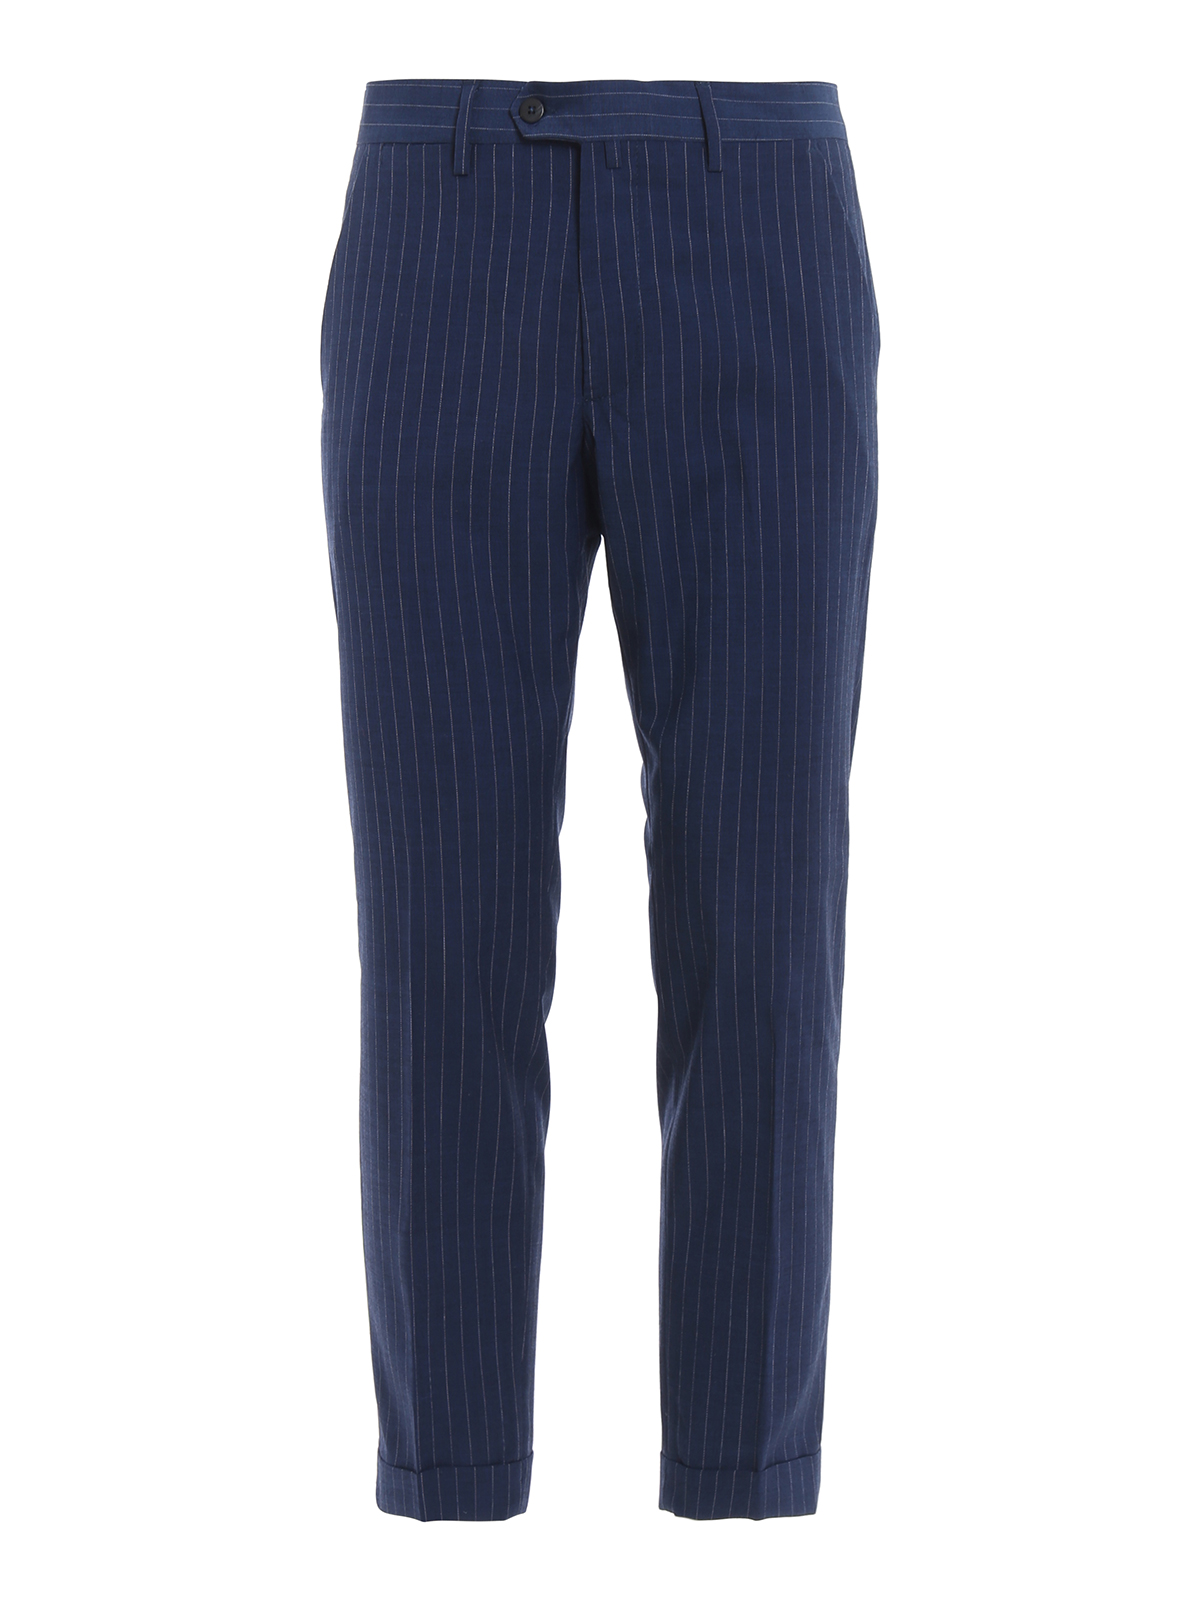 Tailored & Formal trousers Paolo Fiorillo - Frank striped blue